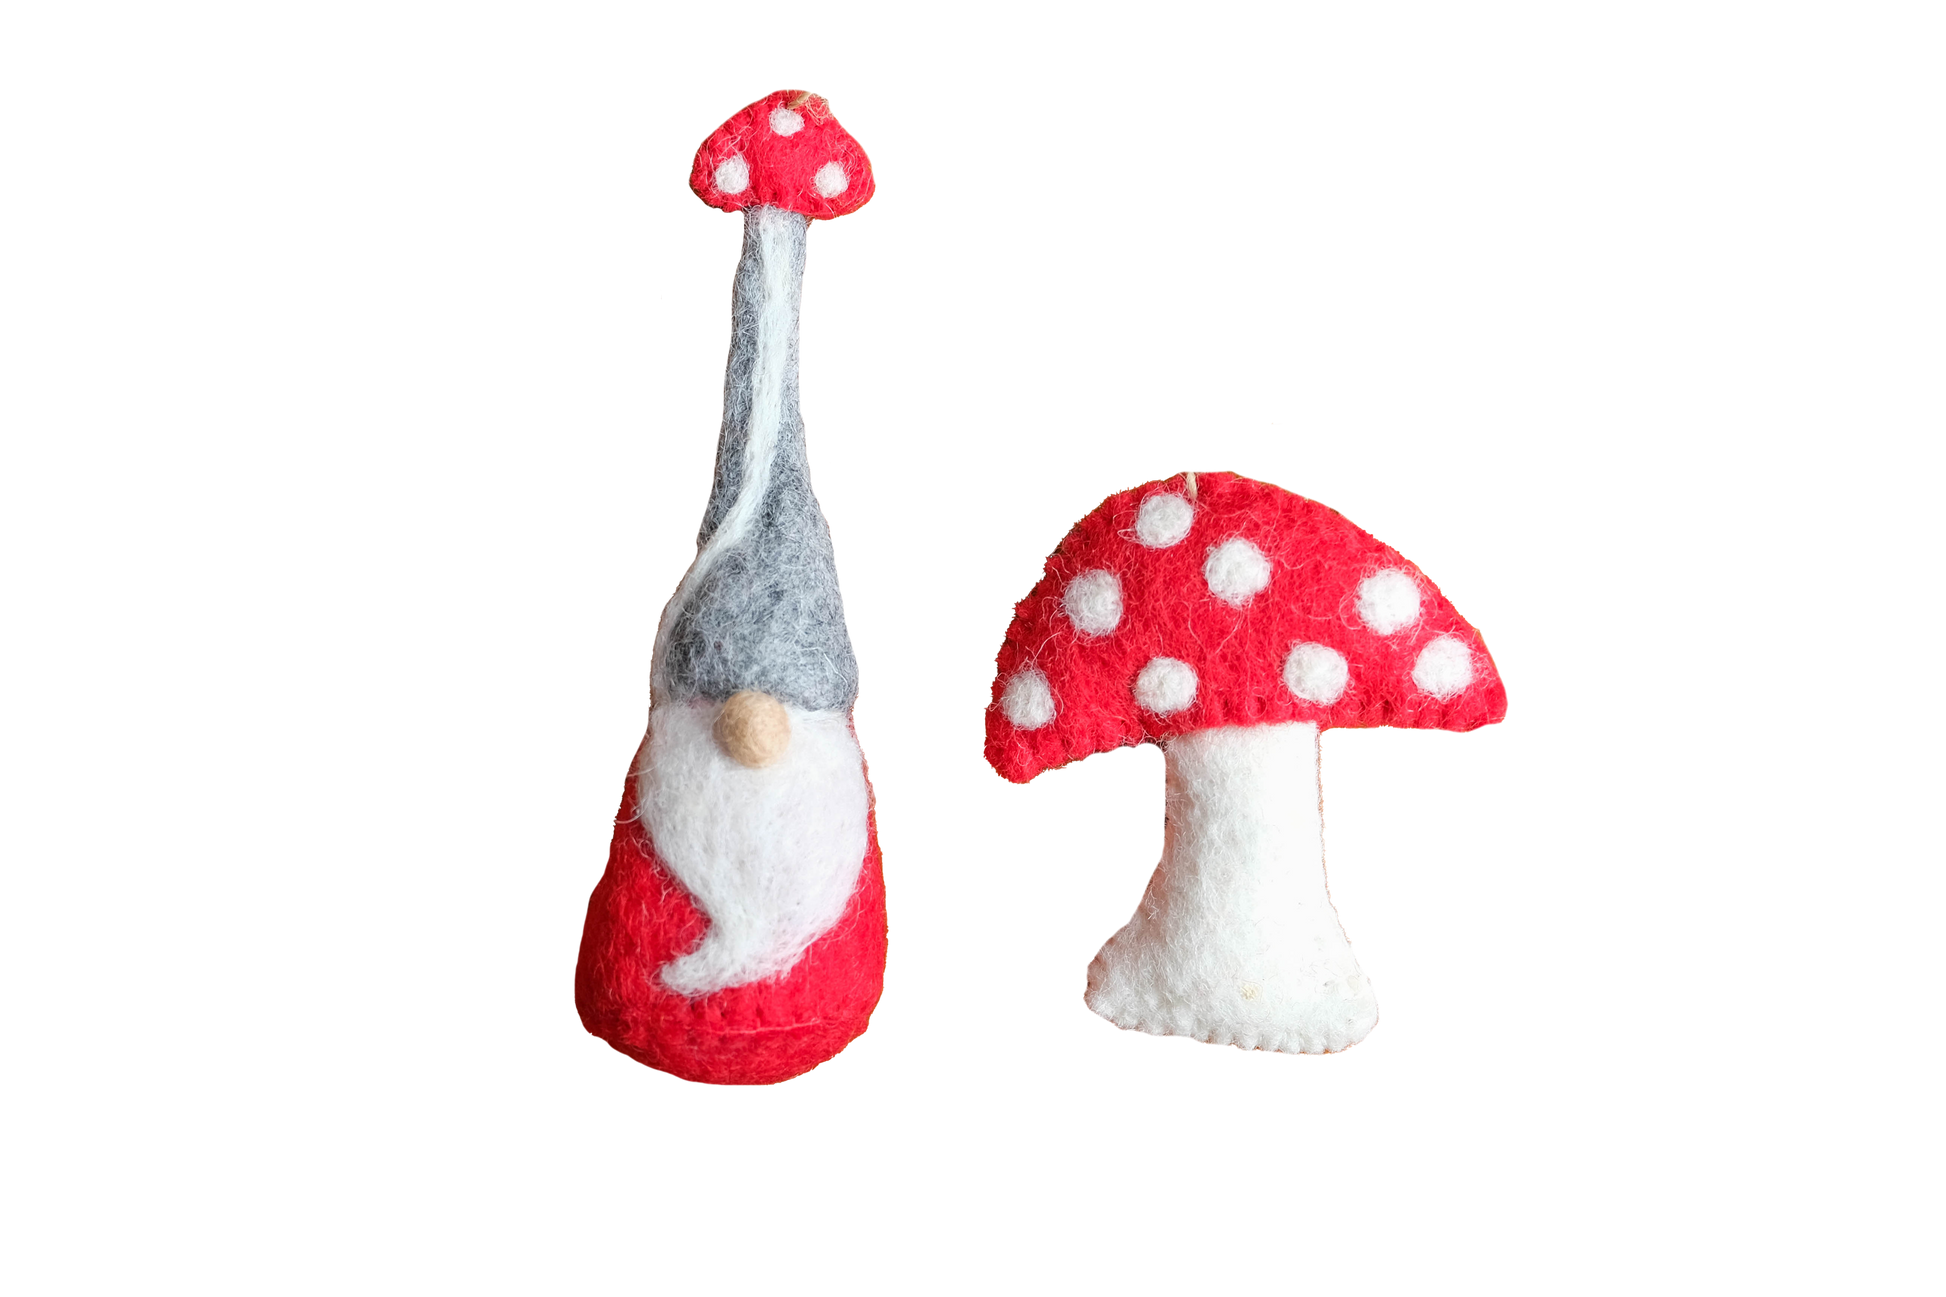 This Global Groove Life, handmade, ethical, fair trade, eco-friendly, sustainable, felt, red mushroom and mushroom hat gnome ornament set was created by artisans in Kathmandu Nepal and will be a beautiful and fun addition to your Christmas tree this holiday season.